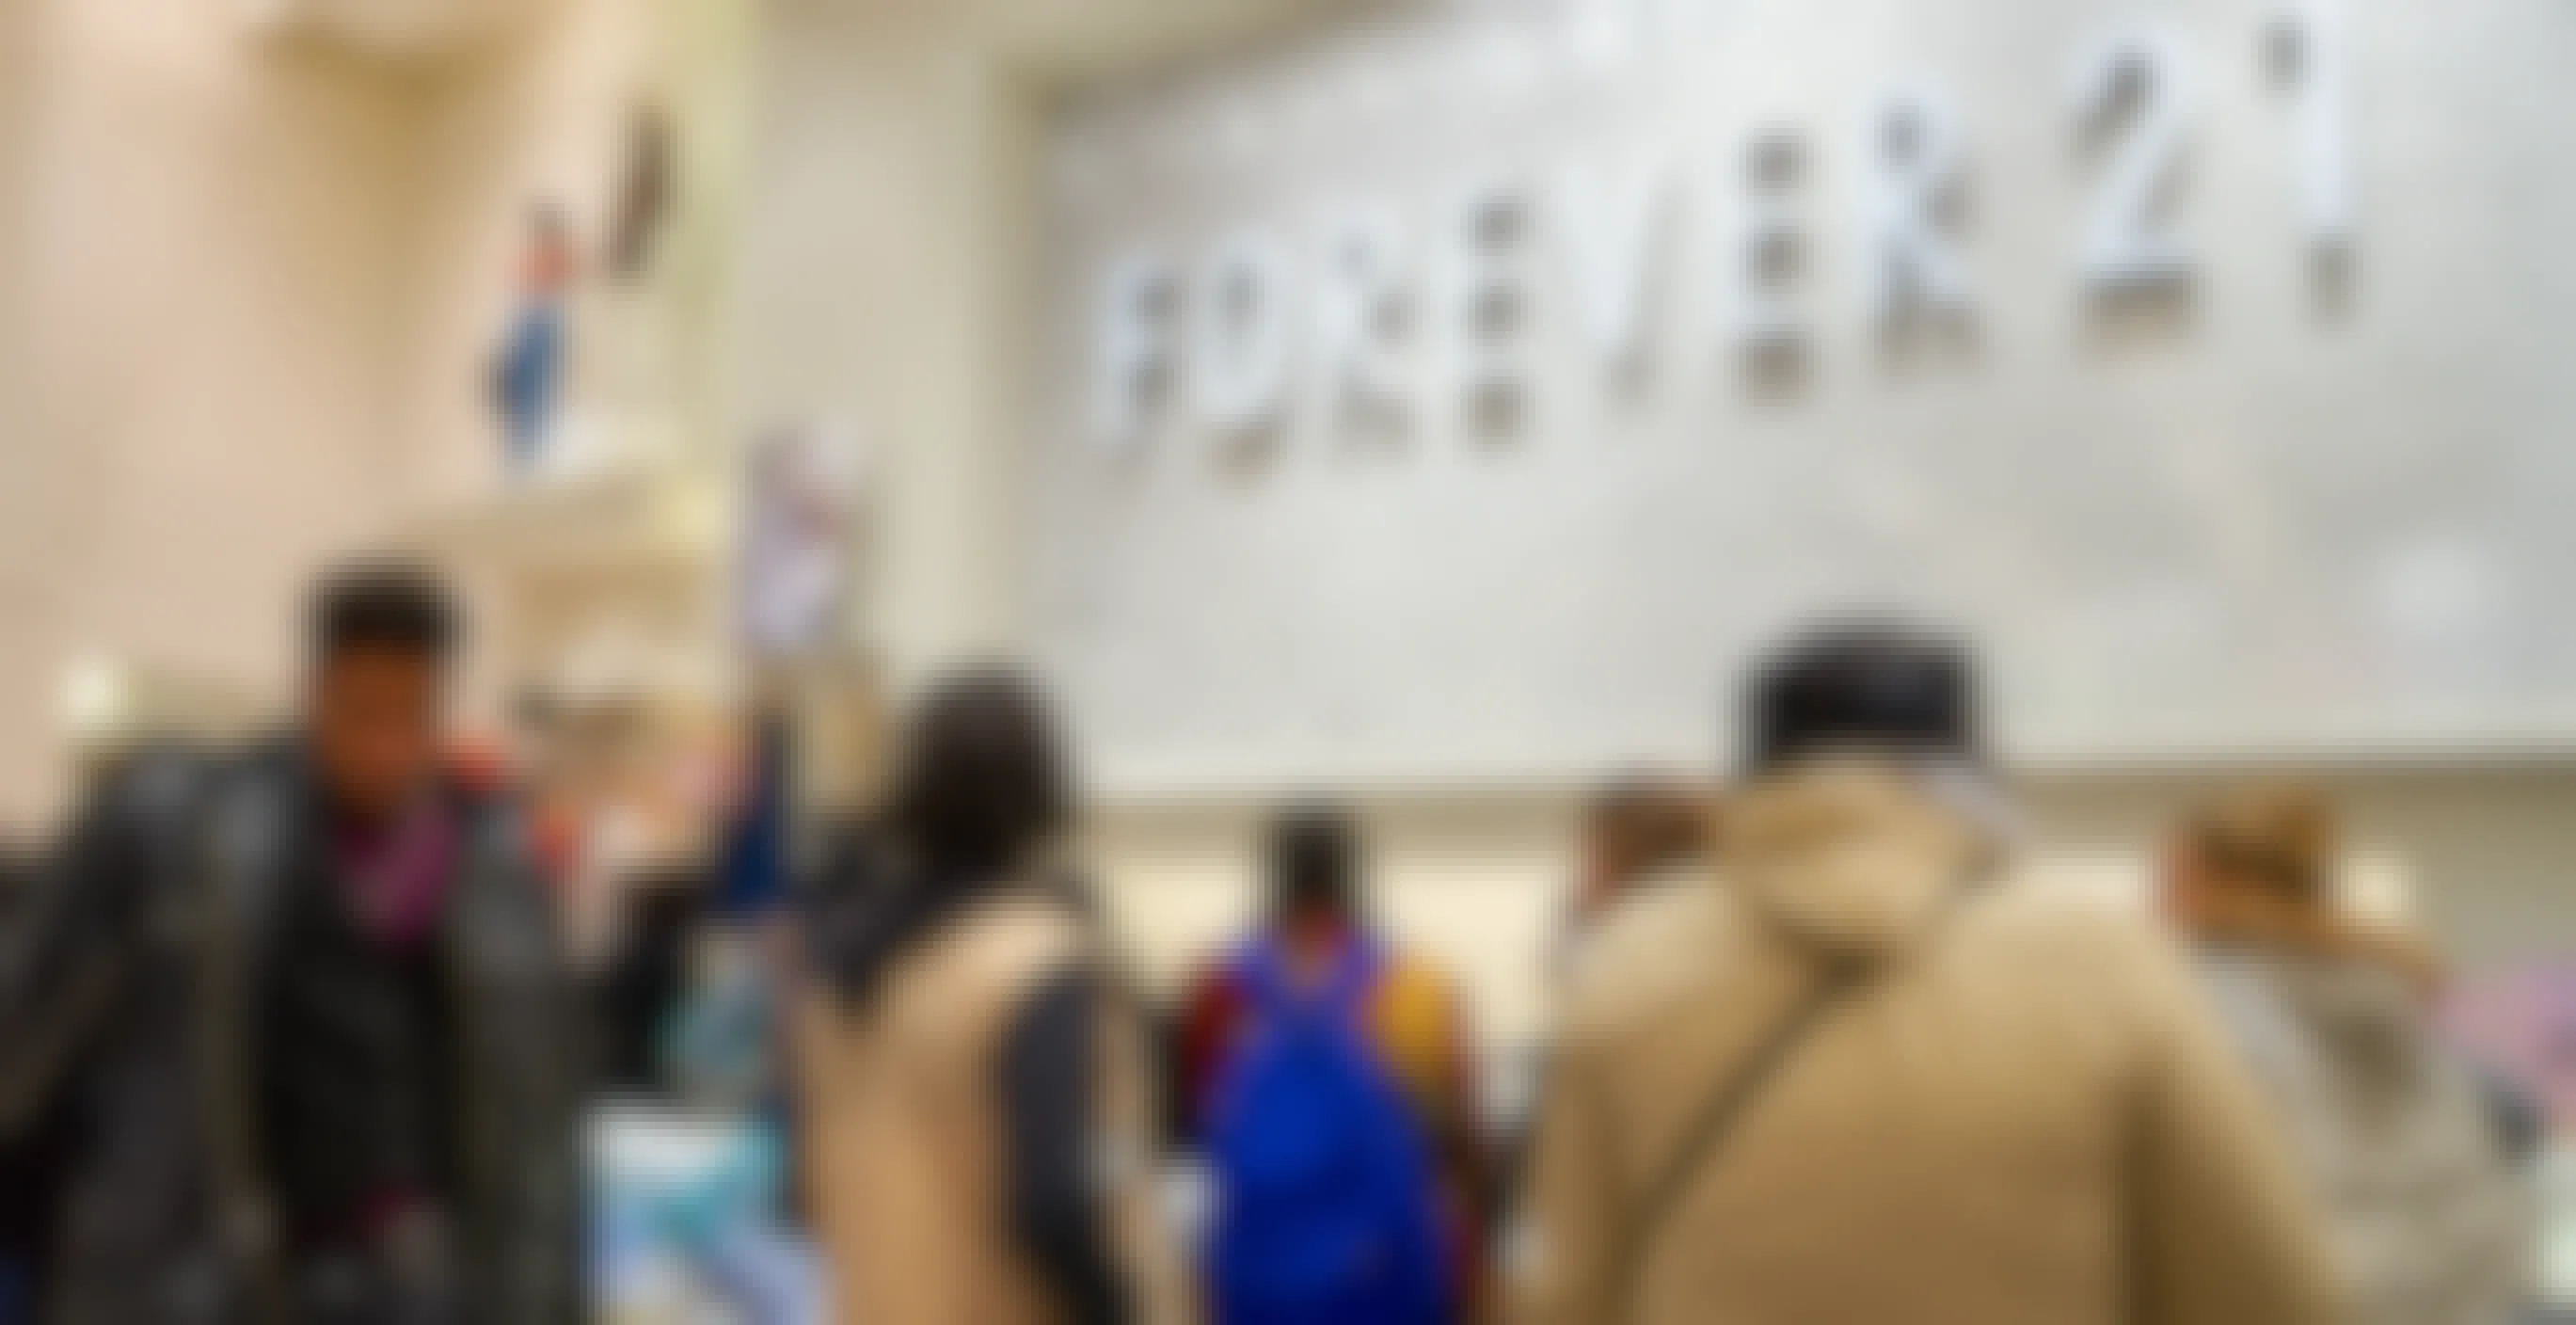 Forever 21 Return Policy: How to Avoid Their $5.99 Return Shipping Fee